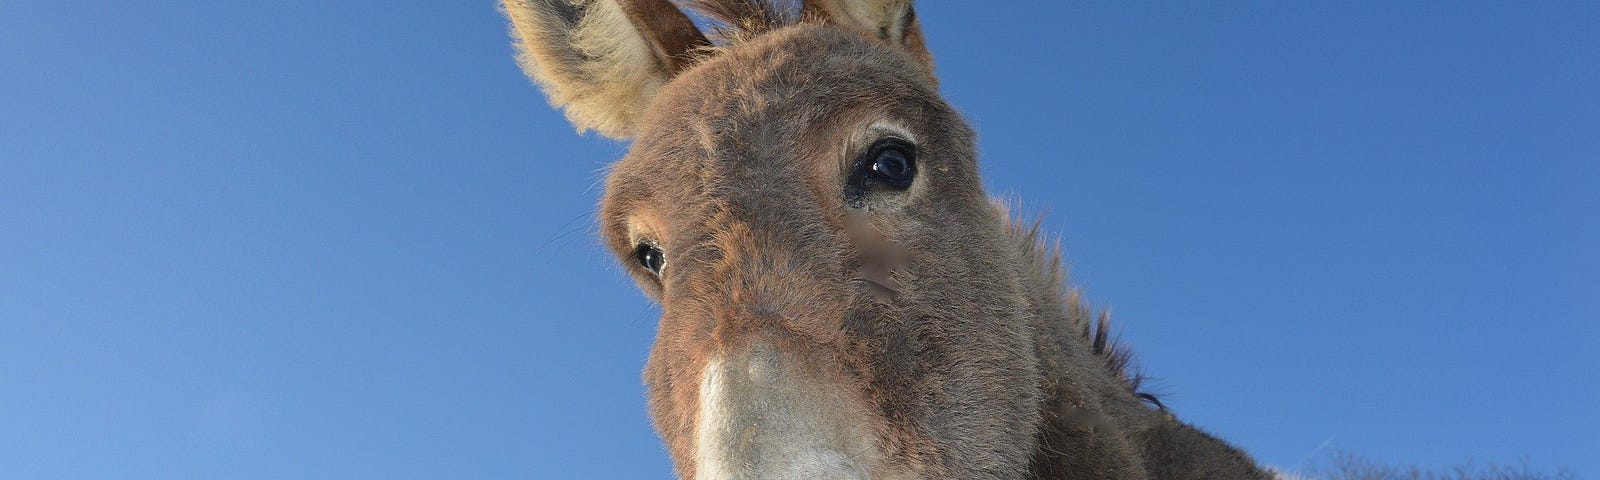 A donkey staring into the camera